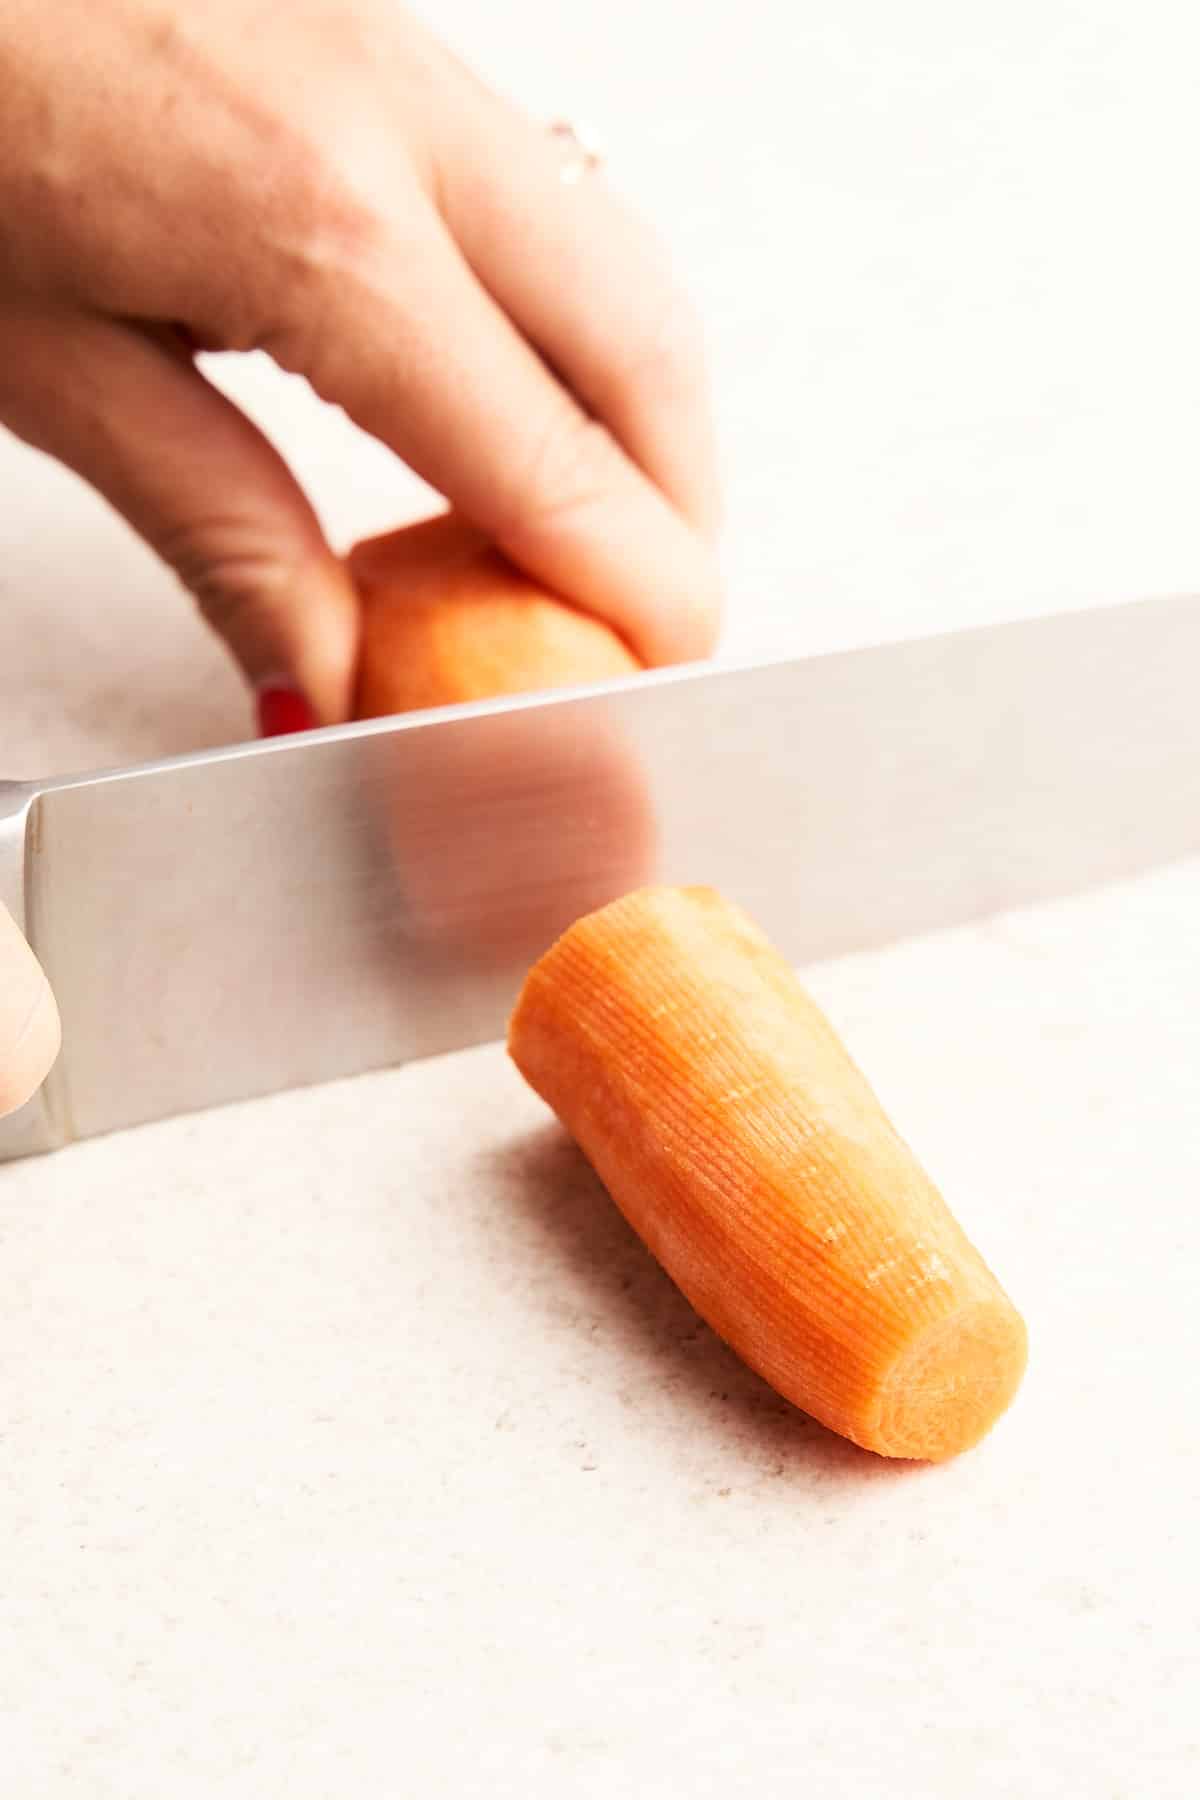 Cutting a carrot into chunks.